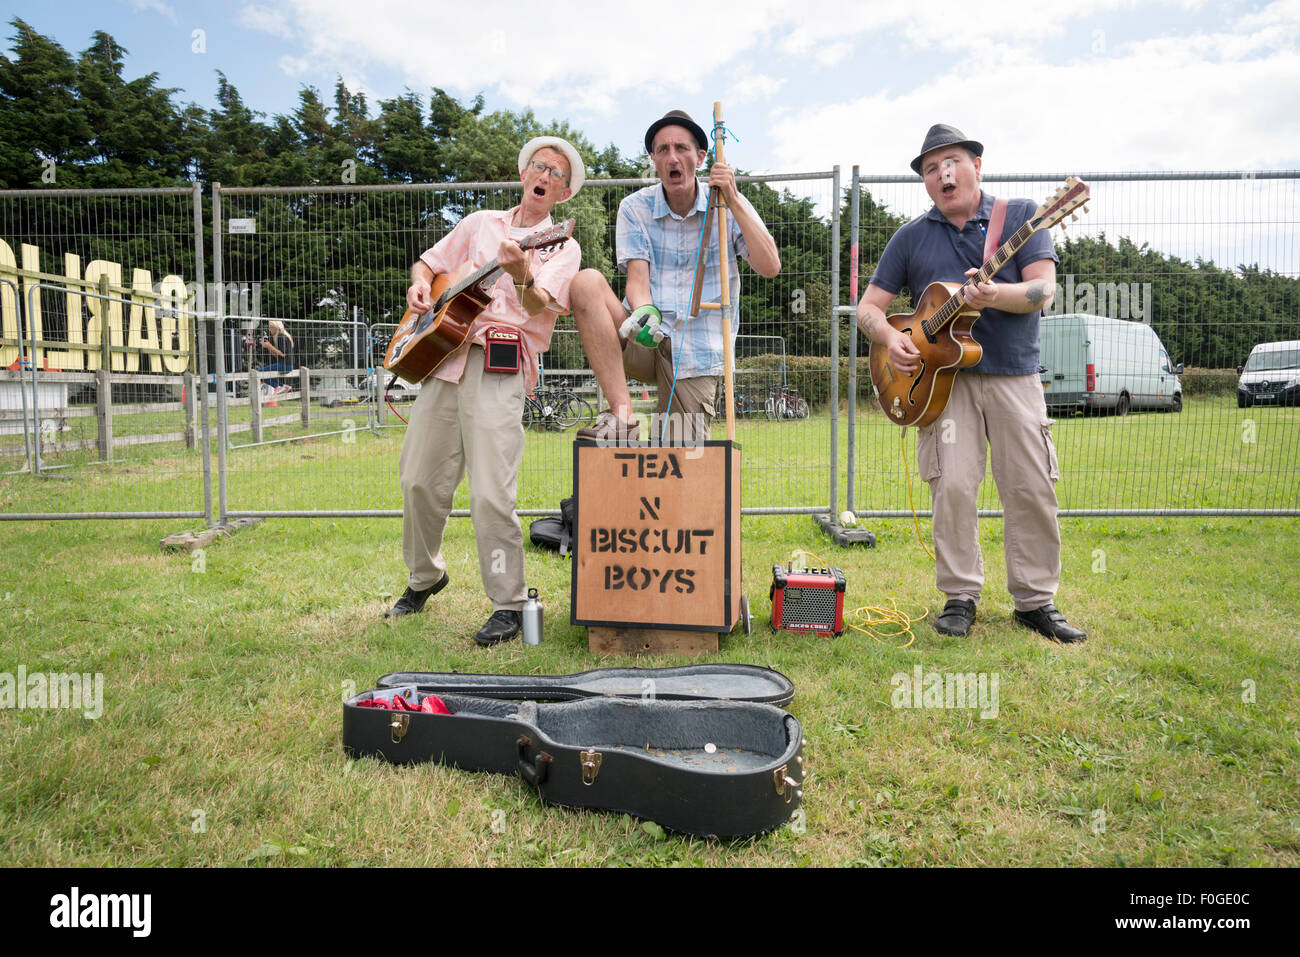 Newchurch, Isle of Wight, UK. 15th Aug, 2015. The Tea and Biscuit Boys busk at the Isle of Wight Garlic Festival, the Island’s biggest summer food fair and entertainment event. The festival celebrates the famous garlic grown on the Island and other local foods, crafts, music and family entertainment. Credit: Julian Eales/Alamy Live News Stock Photo